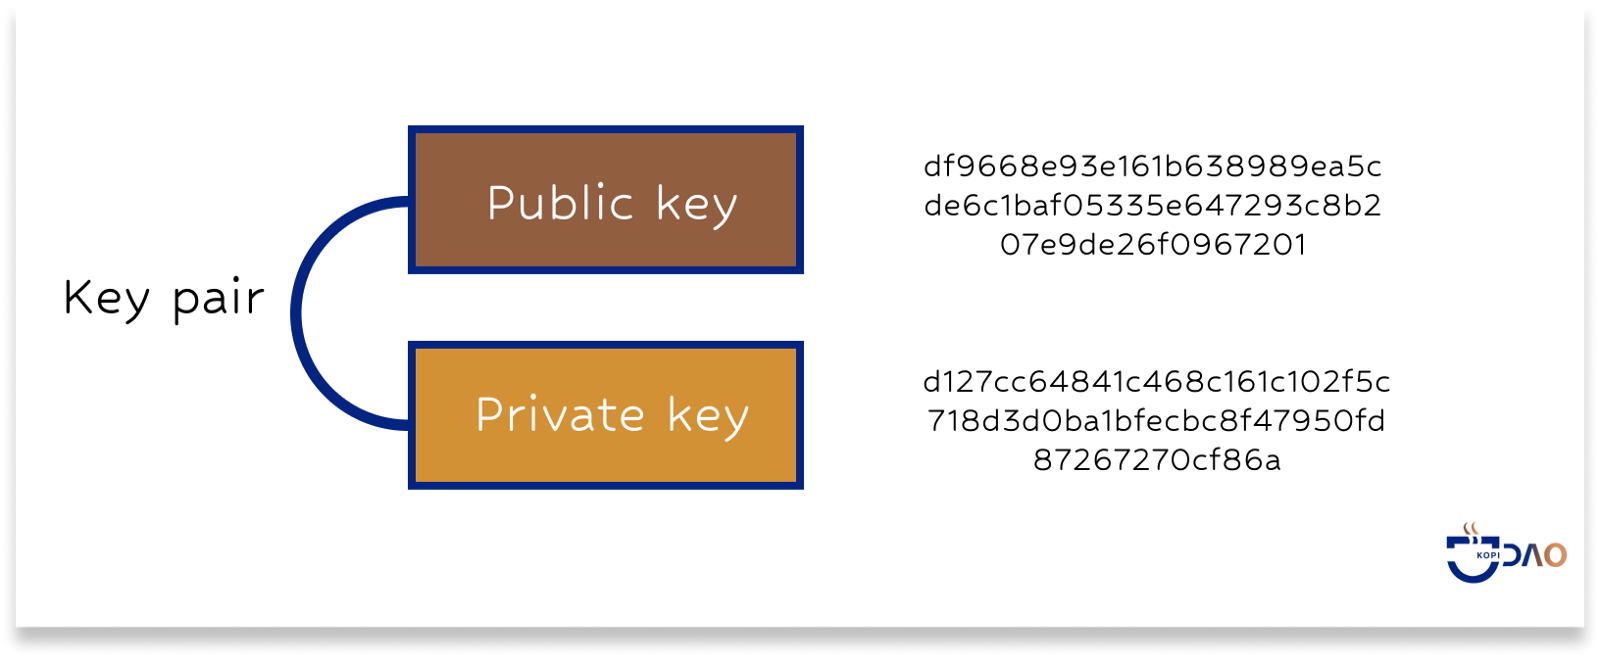 Public / Private key pair: Both are alphanumeric strings, yet the public key is intended for wider distribution, whereas the private key is meant to be kept by one party.